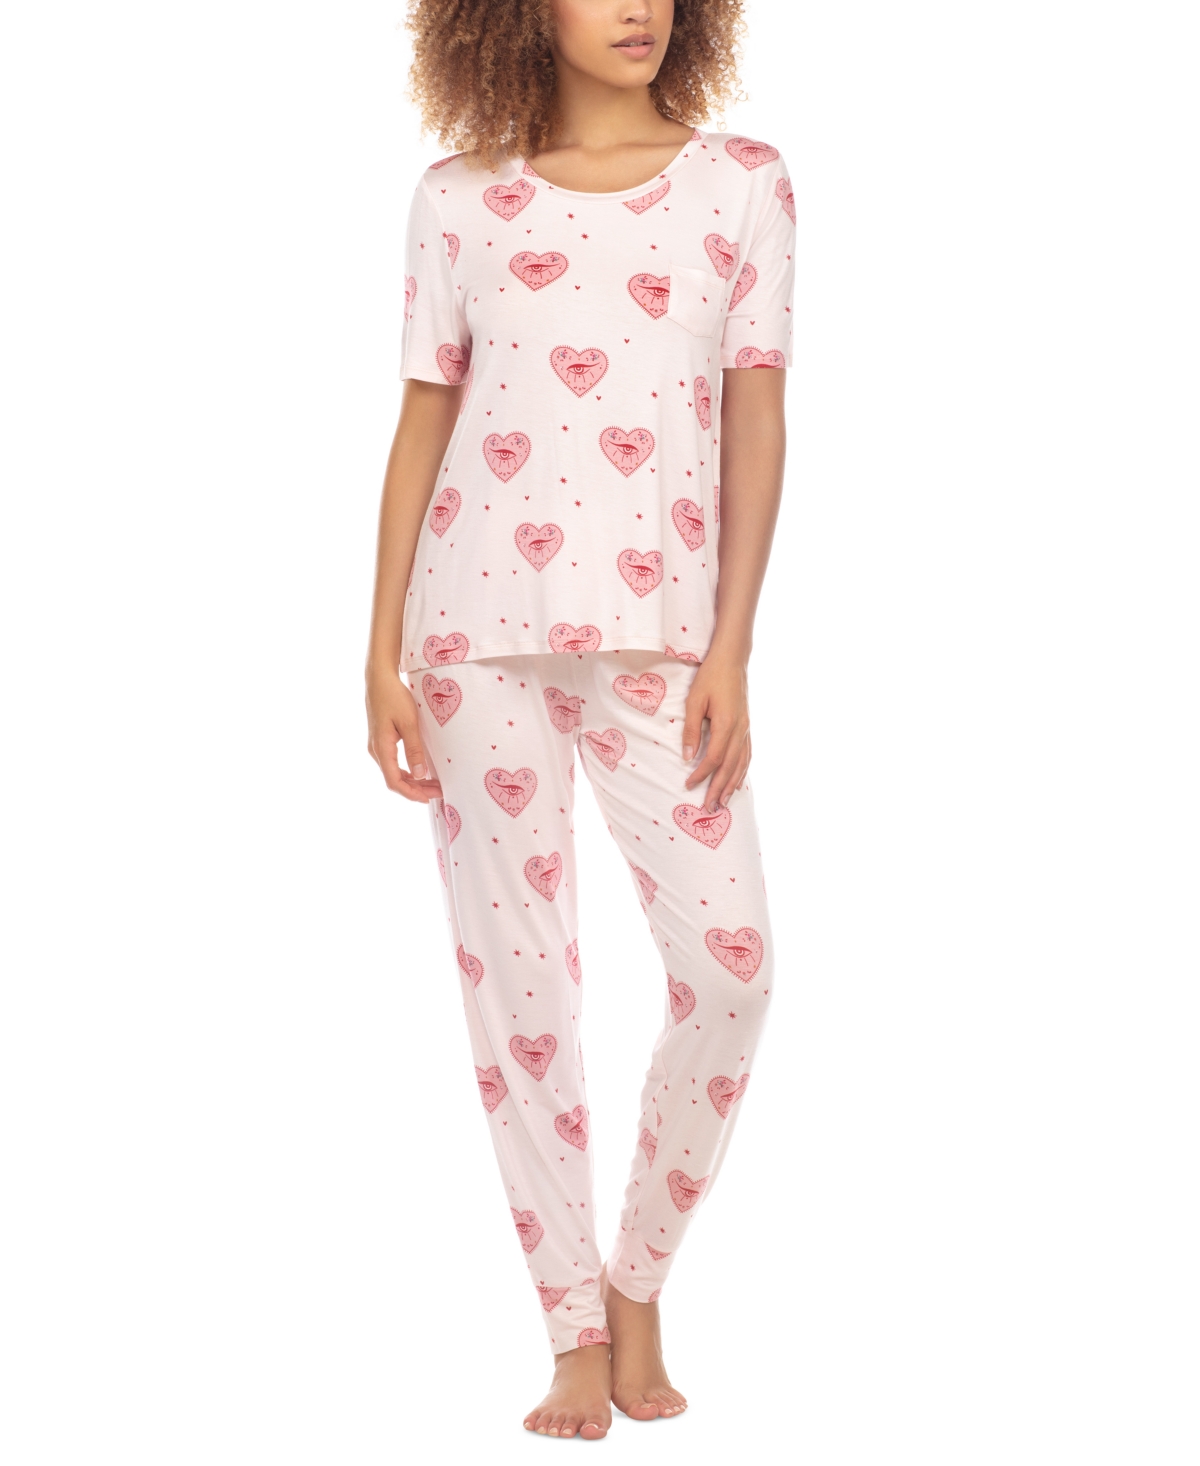 Honeydew Women's Happy Place 2-pc. Printed Pajamas Set In Pure Hearts